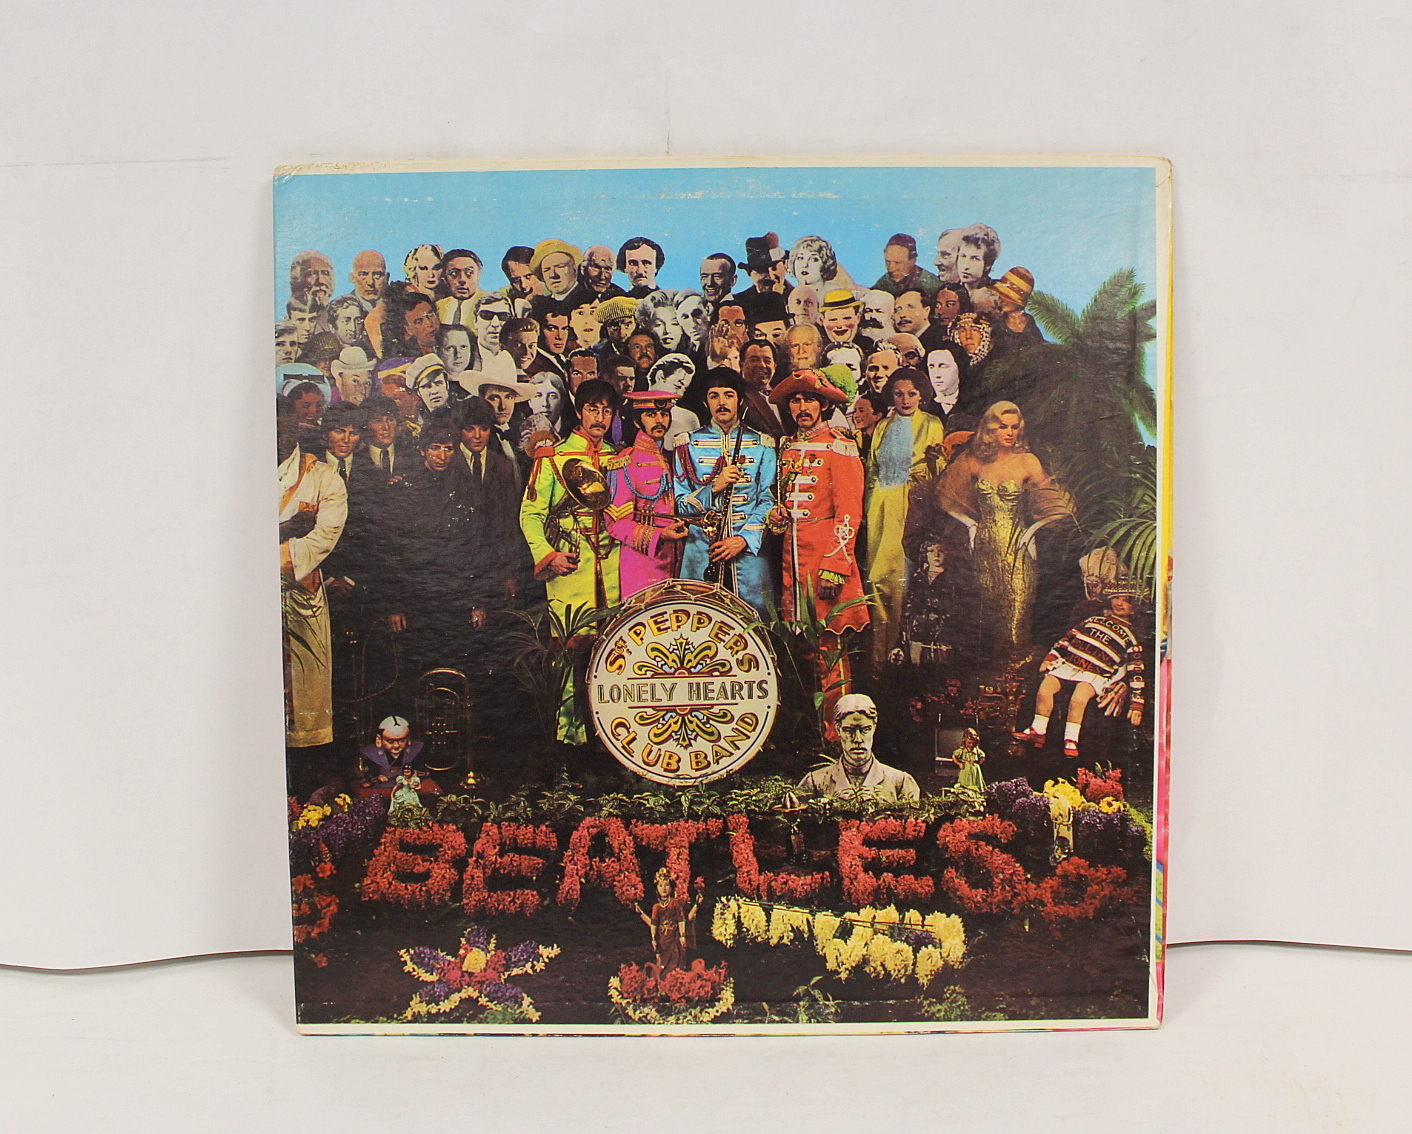 Beatles 'Sgt Pepper' LP, US pressing, with flame inner and insert and rainbow rim label. Without the